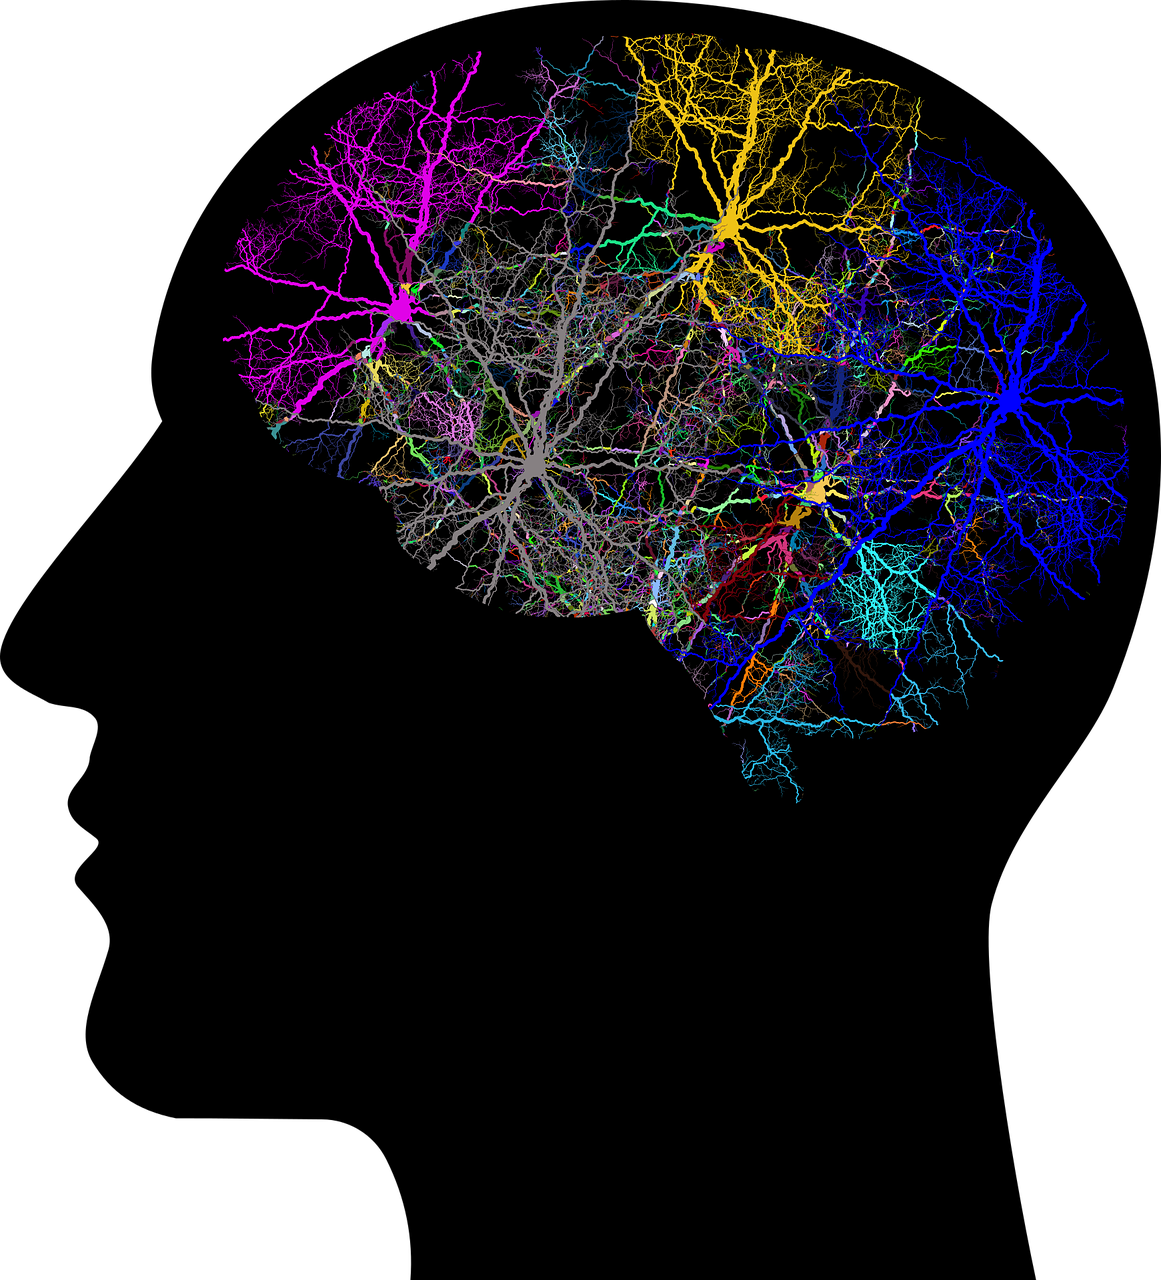 Black silhouette of a human head with colored neurons inside it